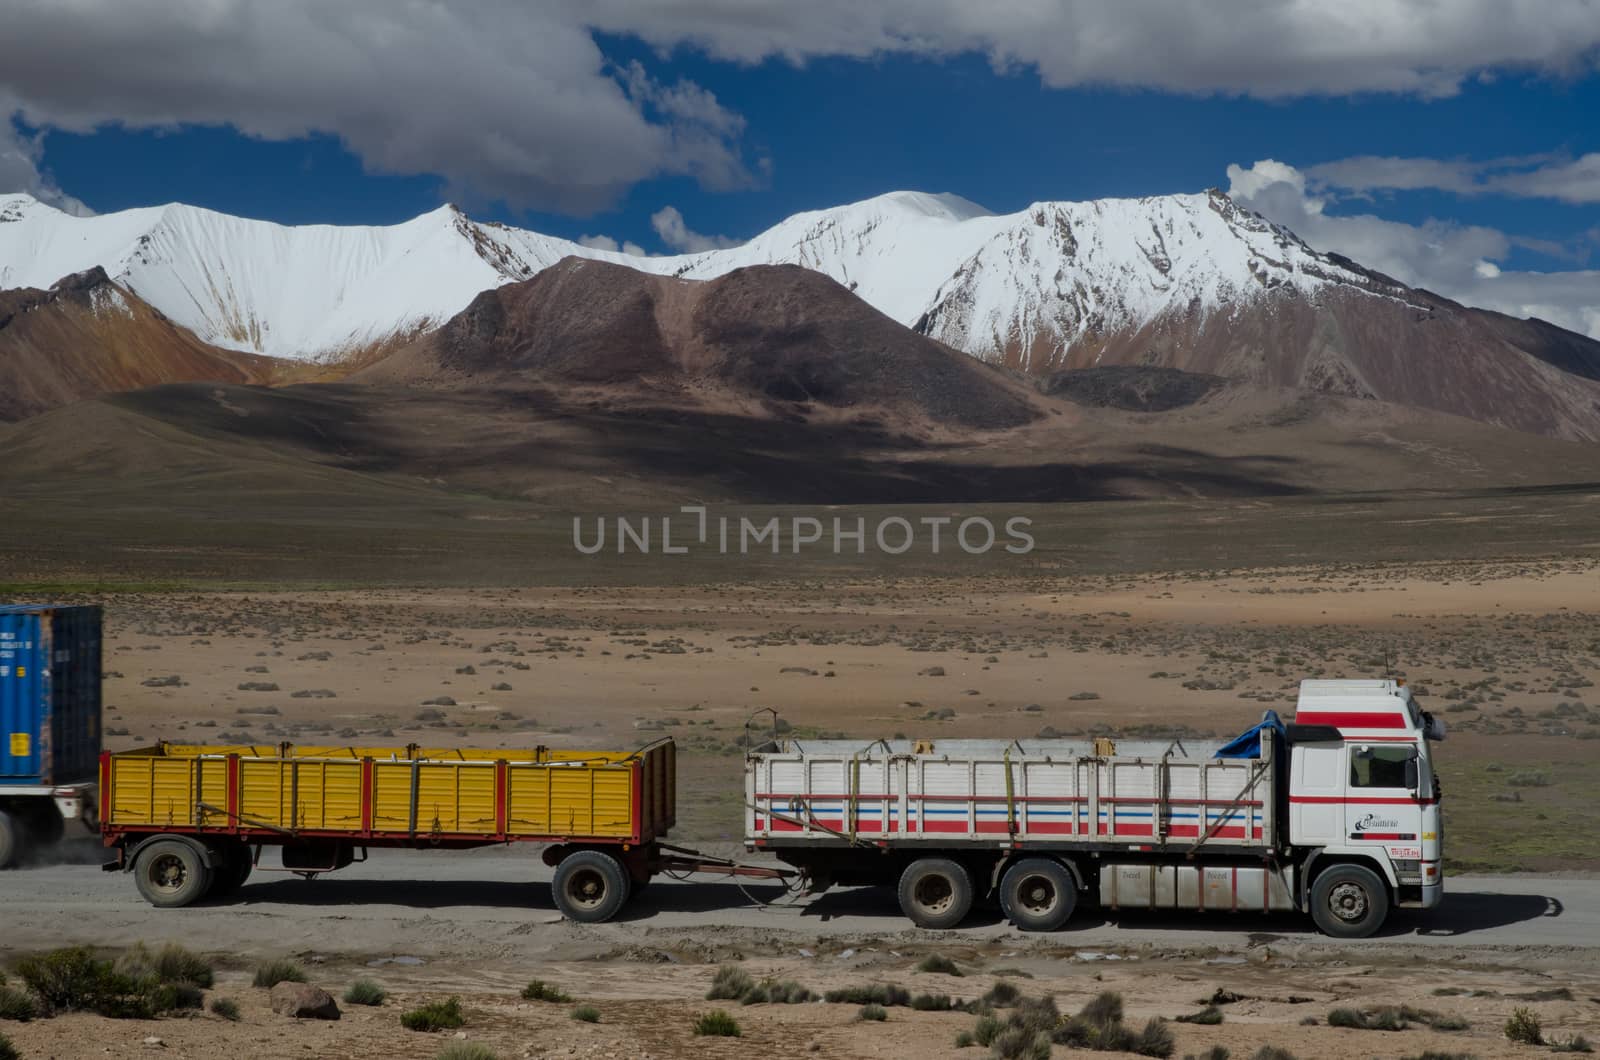 Lauca National Park. Arica y Parinacota region. Chile. February 8, 2012: truck with a trailer.